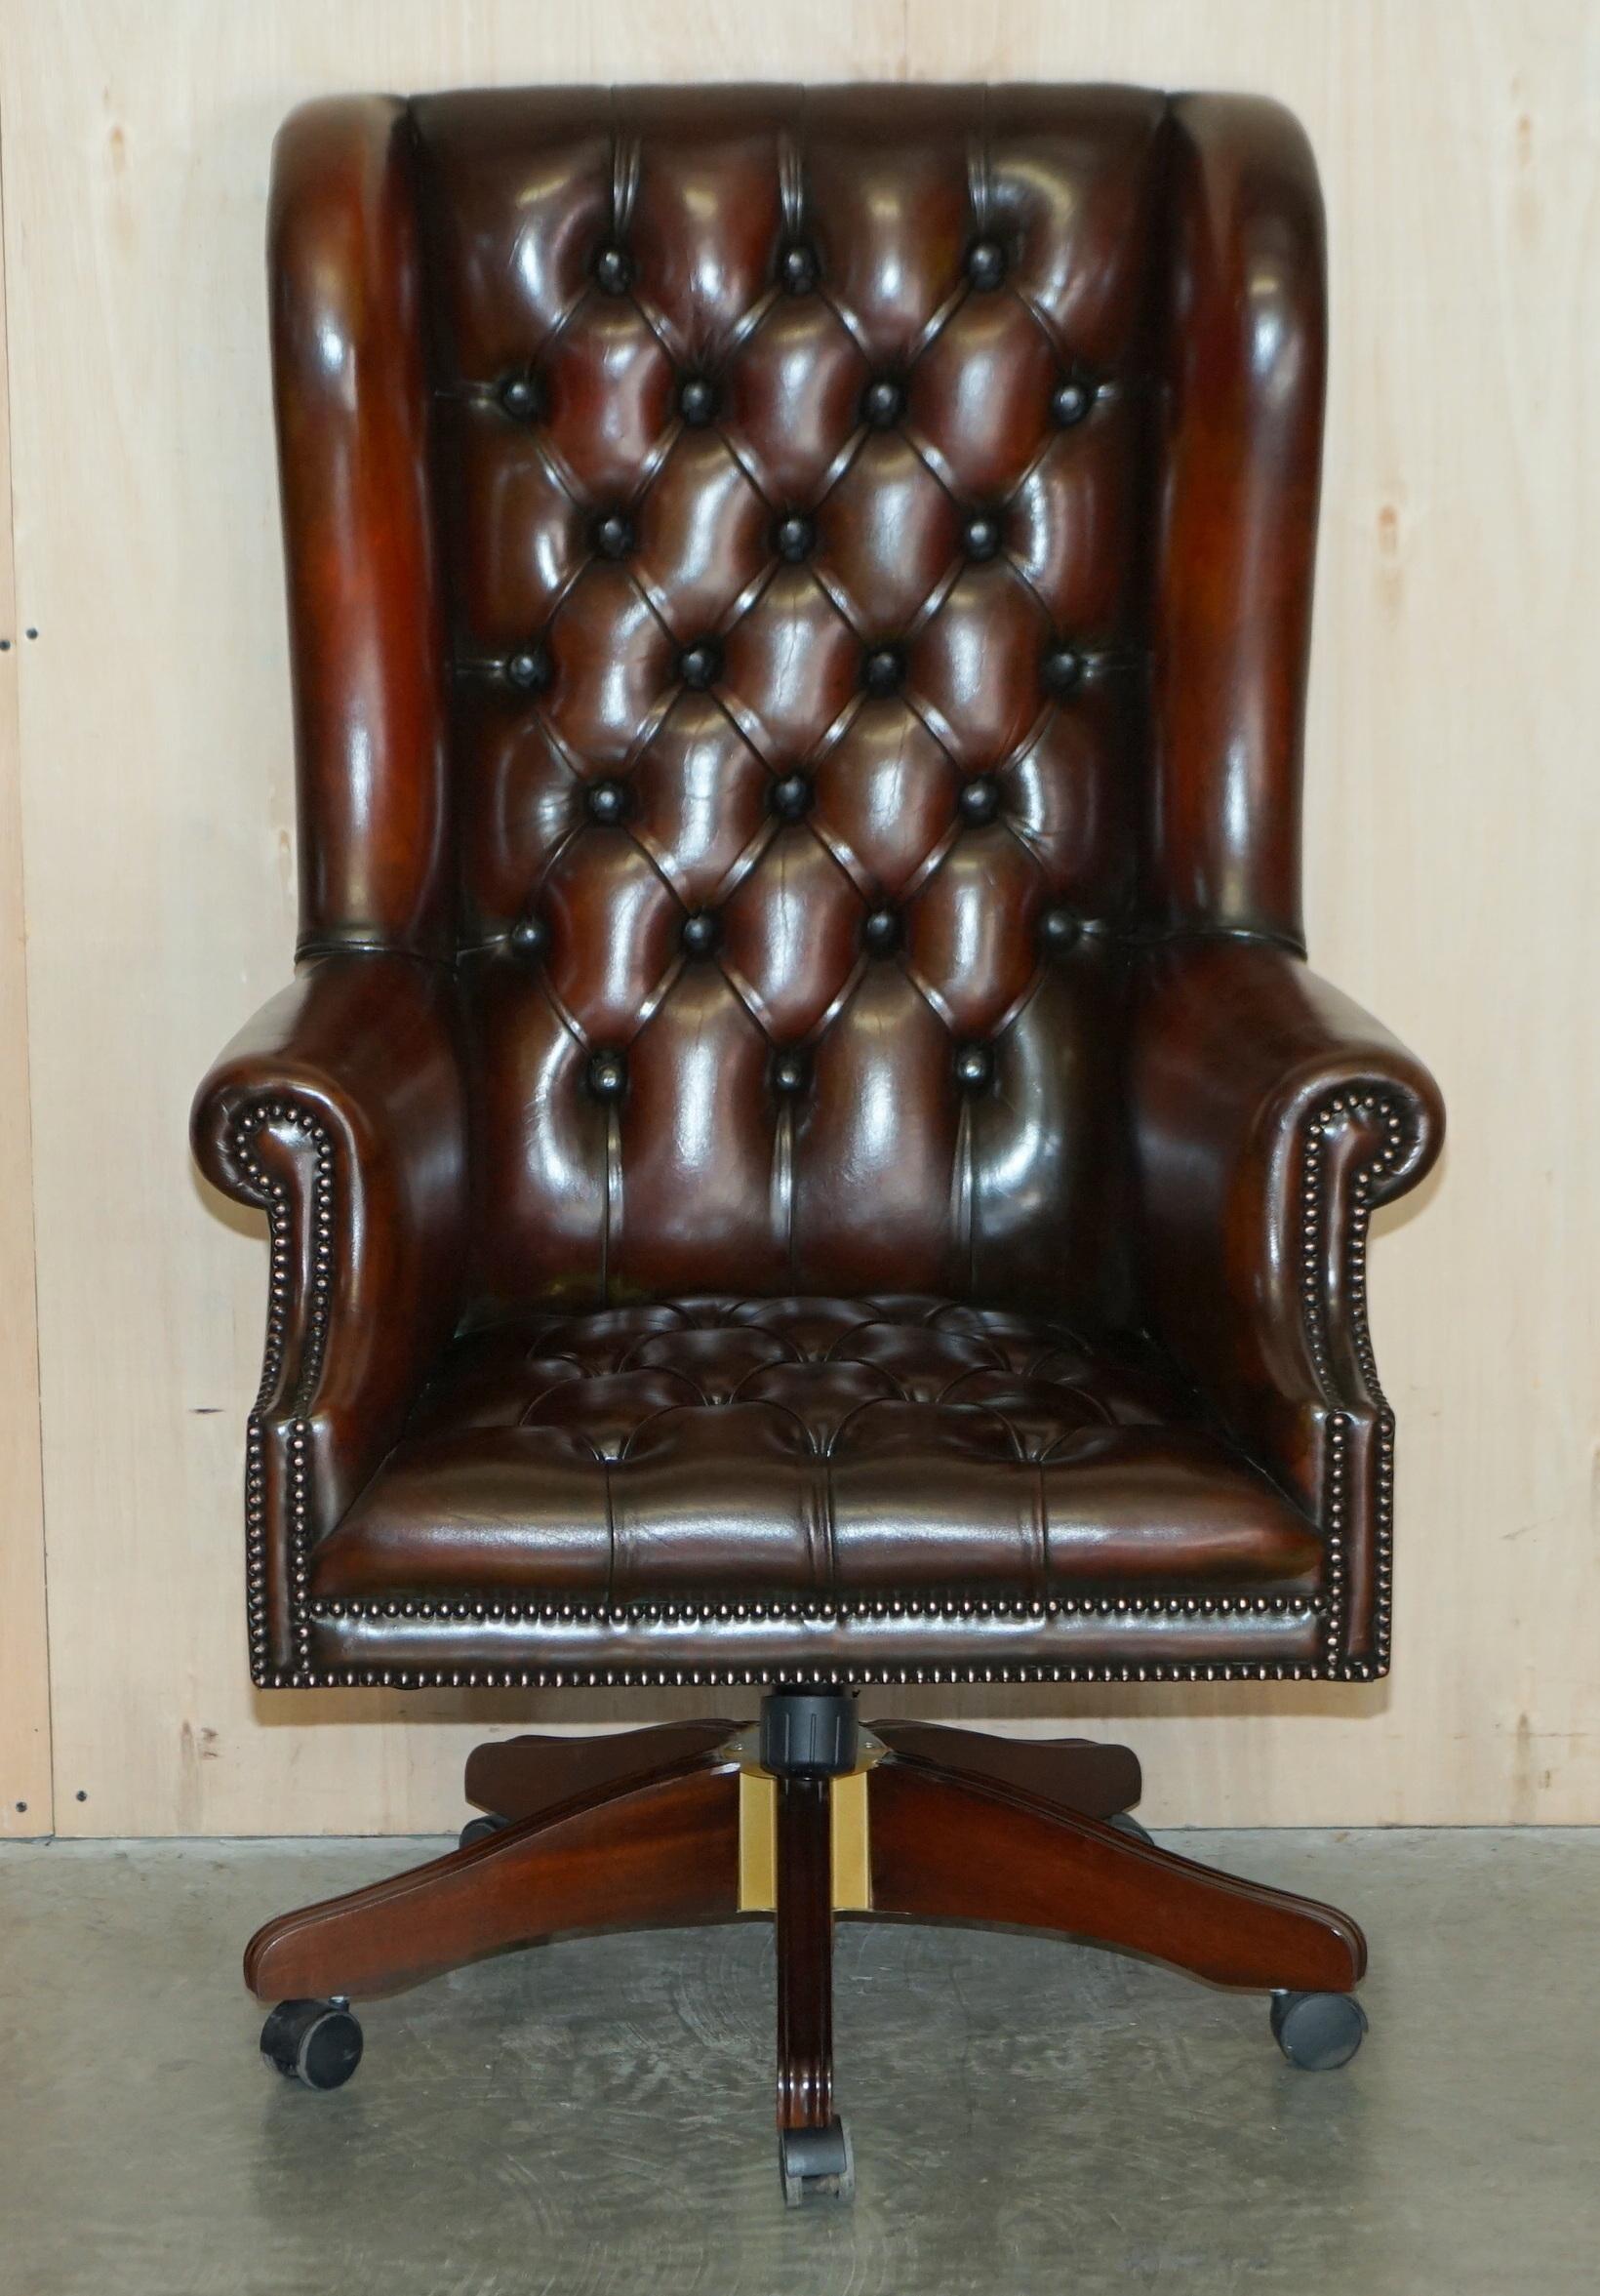 We are delighted to offer for sale this stunning restored hand dyed cigar brown leather very large Chesterfield Wingback office chair with original leather and patina.

This is a very comfortable captain’s indeed, it’s like your favourite reading